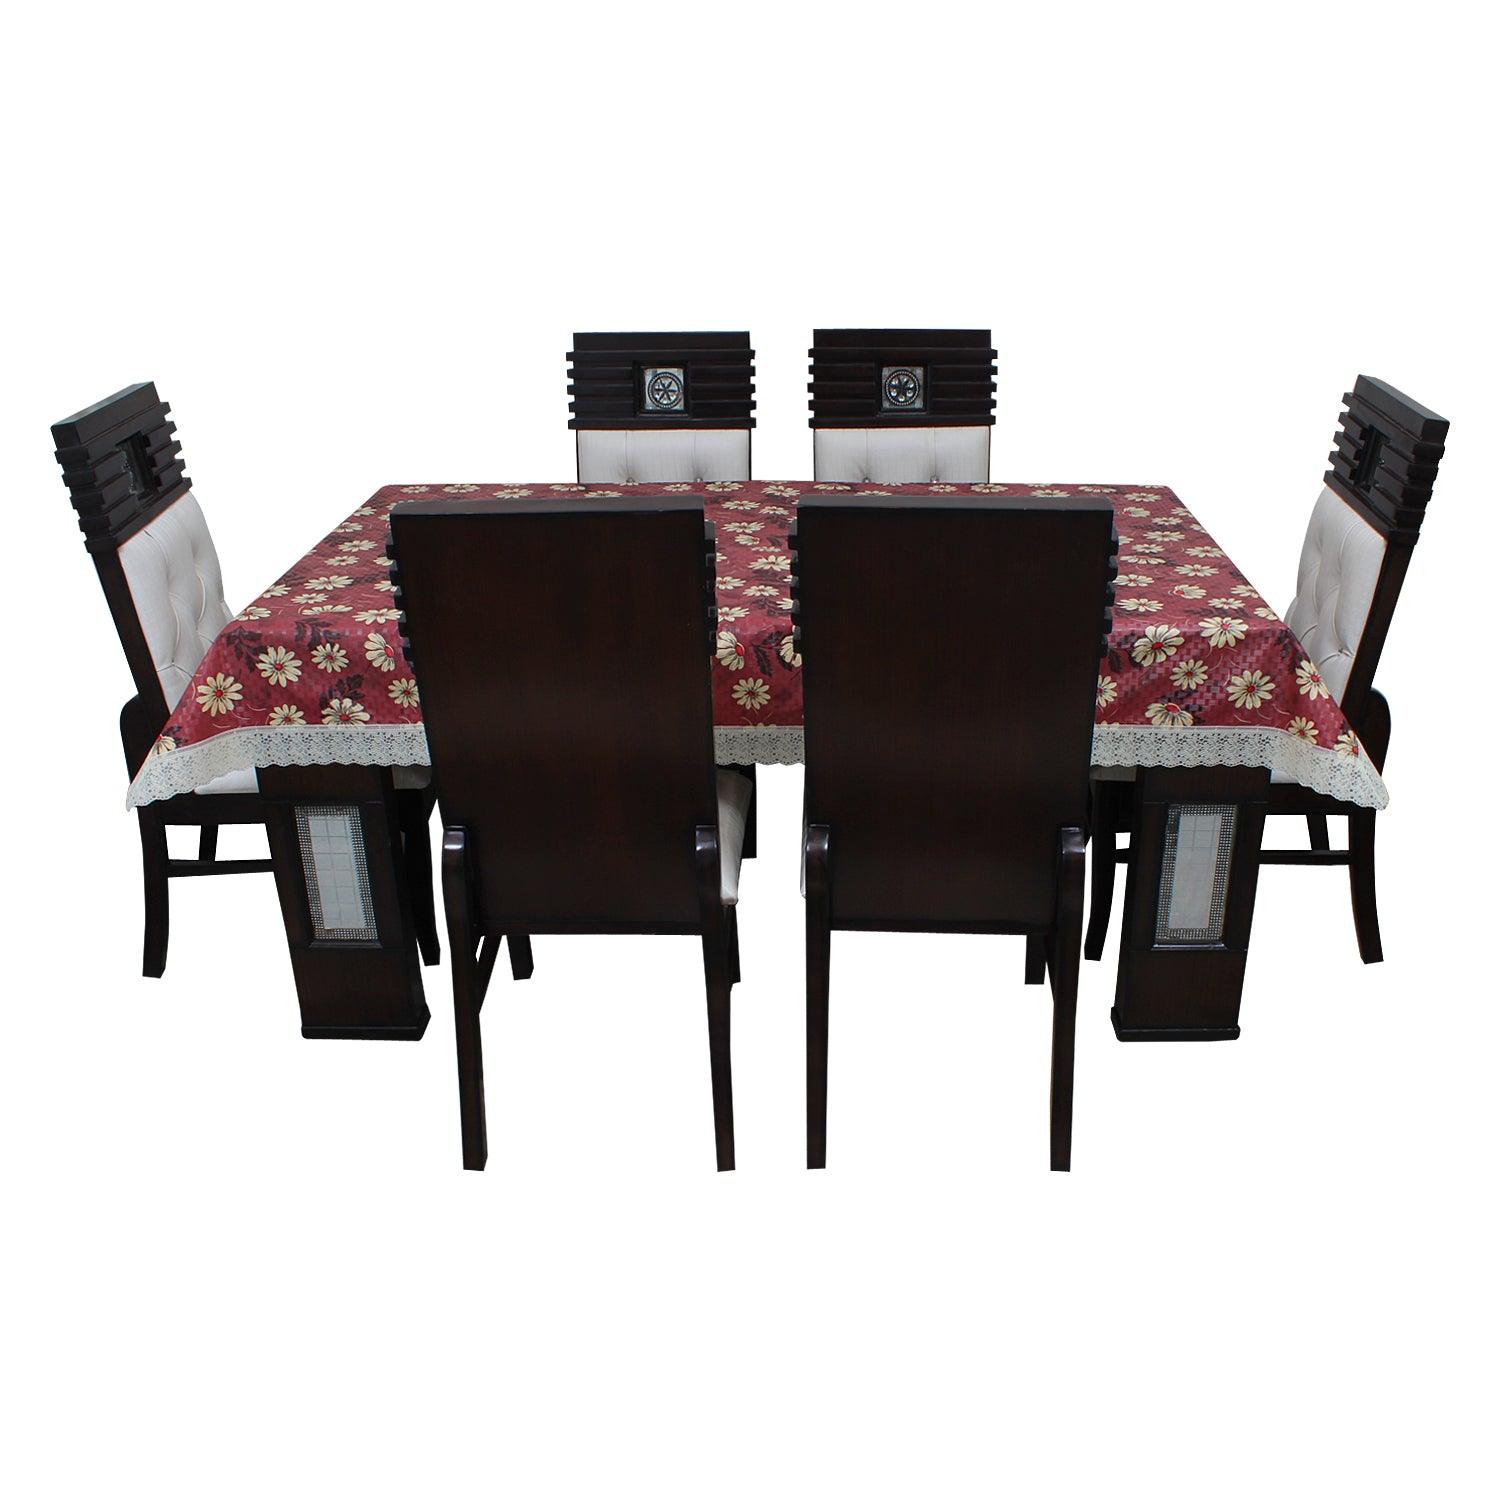 Waterproof and Dustproof Dining Table Cover, SA18 - Dream Care Furnishings Private Limited